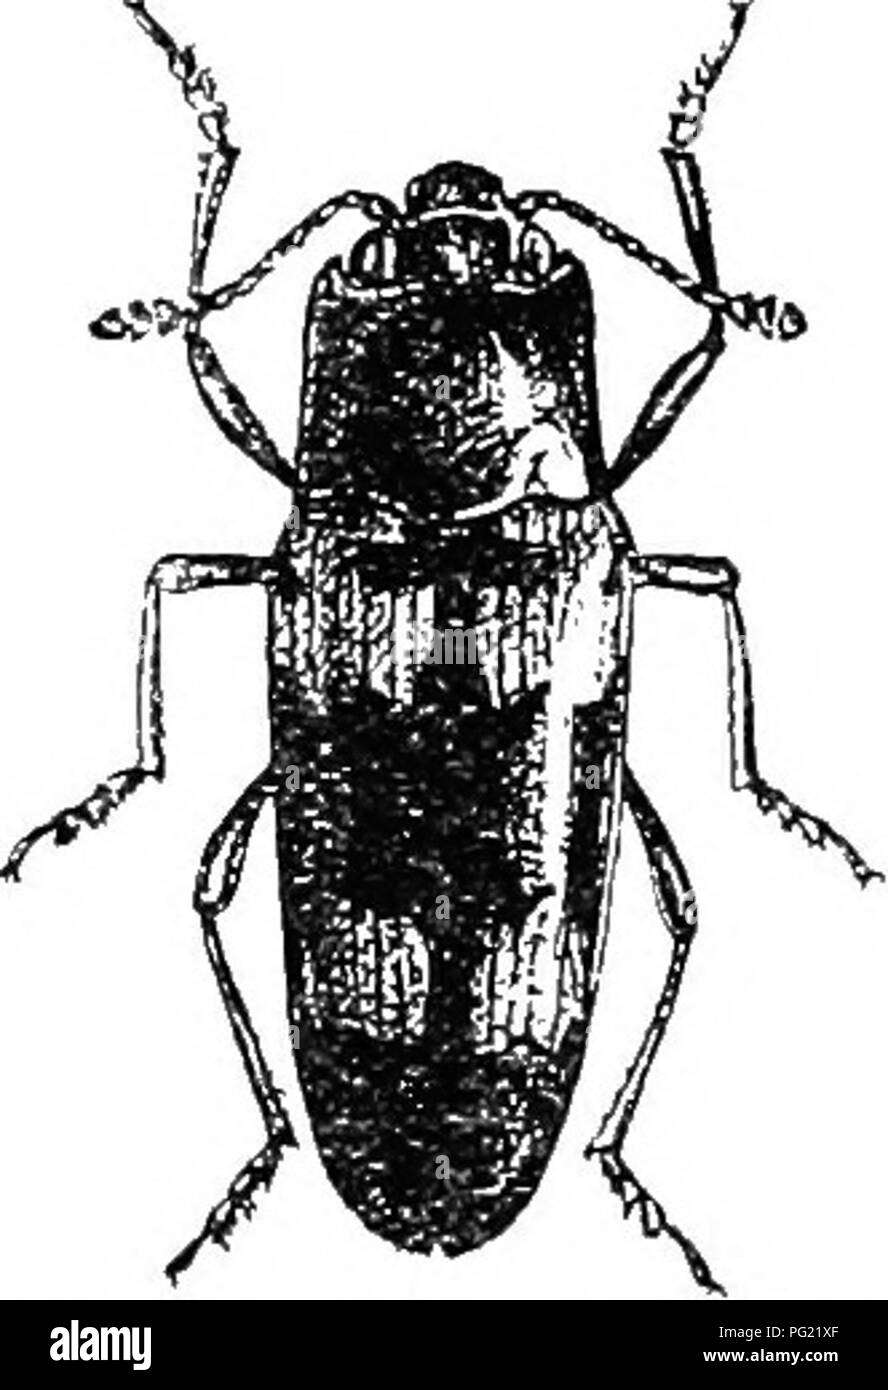 . An illustrated descriptive catalogue of the coleoptera or beetles (exclusive of the Rhynchophora) known to occur in Indiana : with bibliography and descriptions of new species . Beetles. THE PLEASING FUNGUS BEETLES. 545 b. Mead and thorax nearly smooth; elytra with blacjv crossbars; length 12-15 llllll. 1039. FASCIATA. 66. Head and Ihorax very coarsely and distinctly imuctured; elytra each with four black spots; length less than 6 mm. 1041. ulkei. *10:',n (3216). Megalodacne fasciata Fab., Ent. Syst., II, 1798, 511. Oblong-ovate. Black, shining; elytra with two reddish crossbars, the basal o Stock Photo